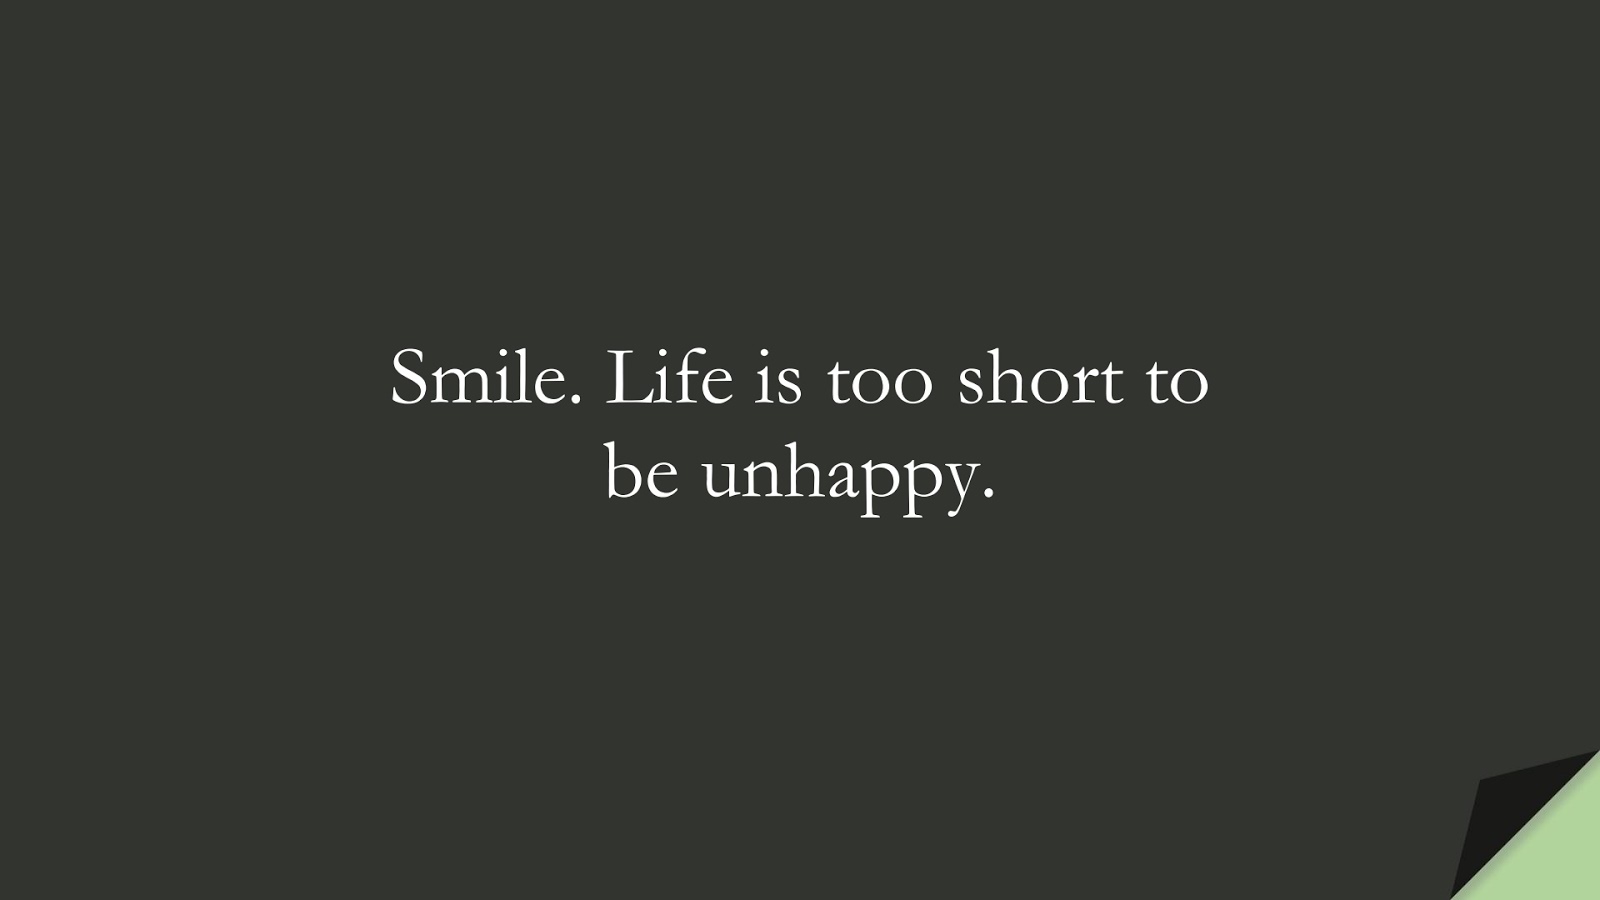 Smile. Life is too short to be unhappy.FALSE